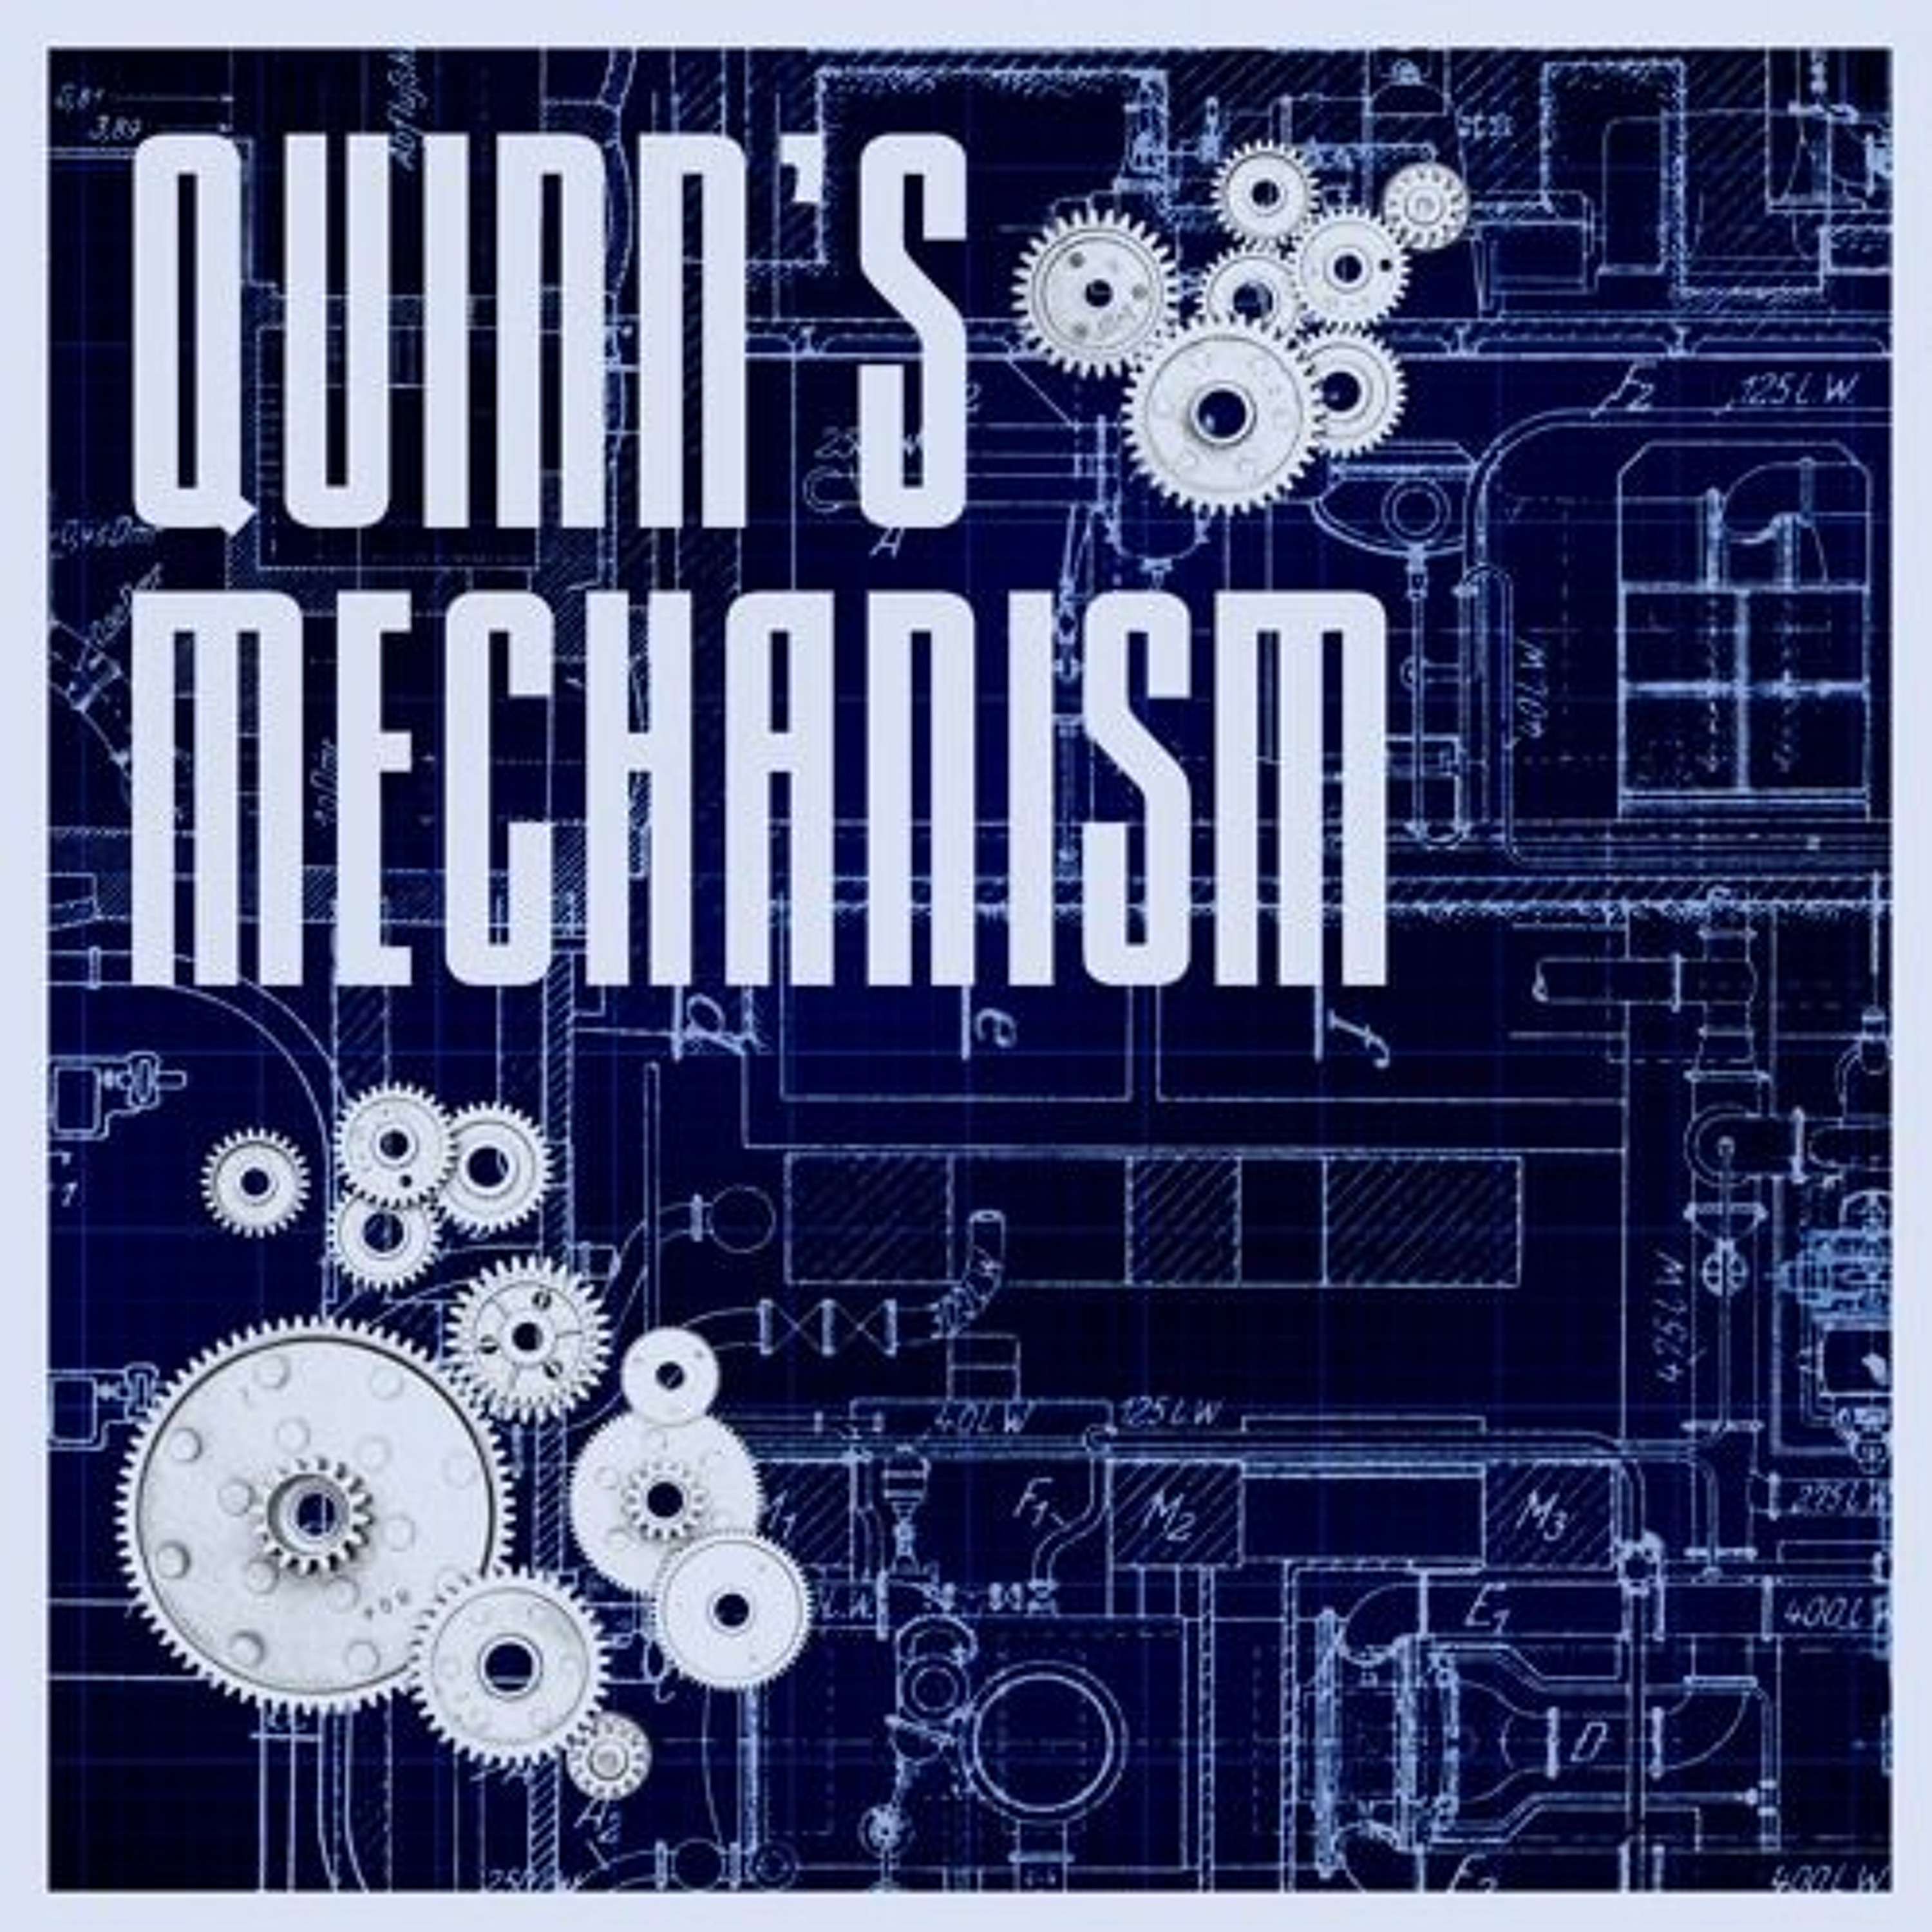 Quinn's Mechanism - Third Act, The Fifth Component